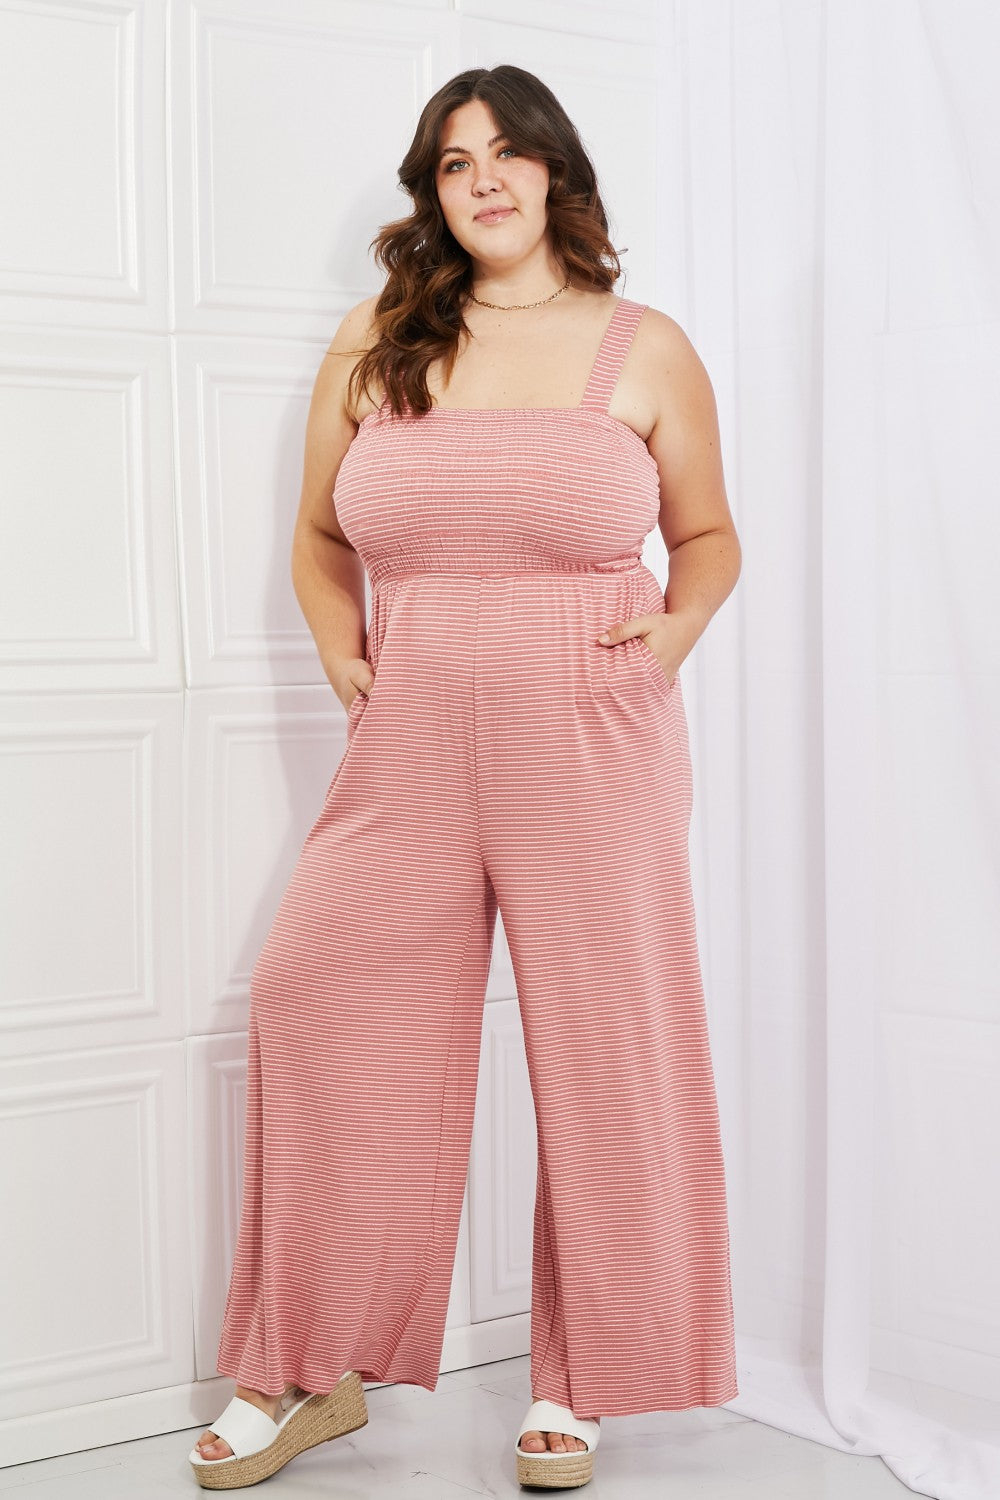 Only Exception  Striped Jumpsuit - Alonna's Legging Land